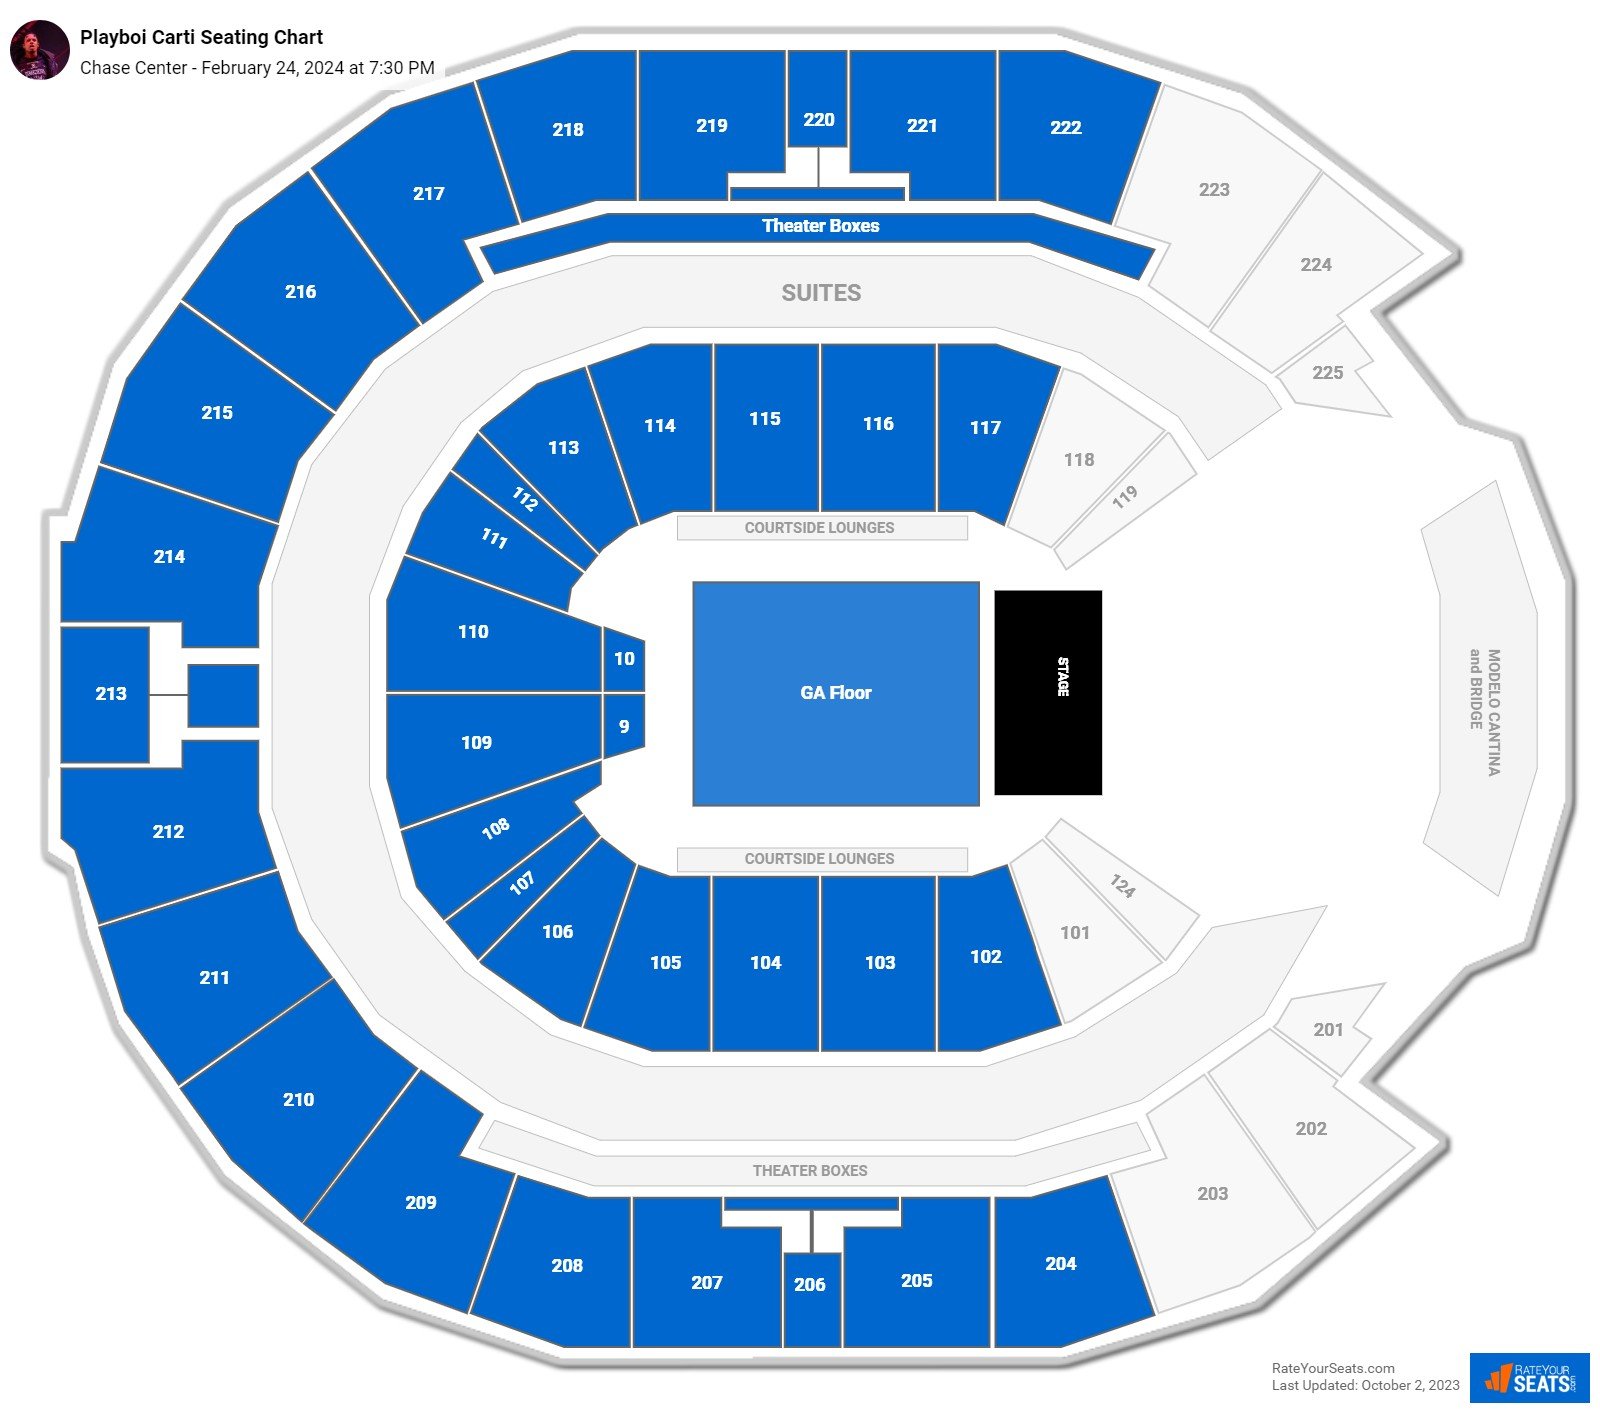 Chase Center Concert Seating Chart